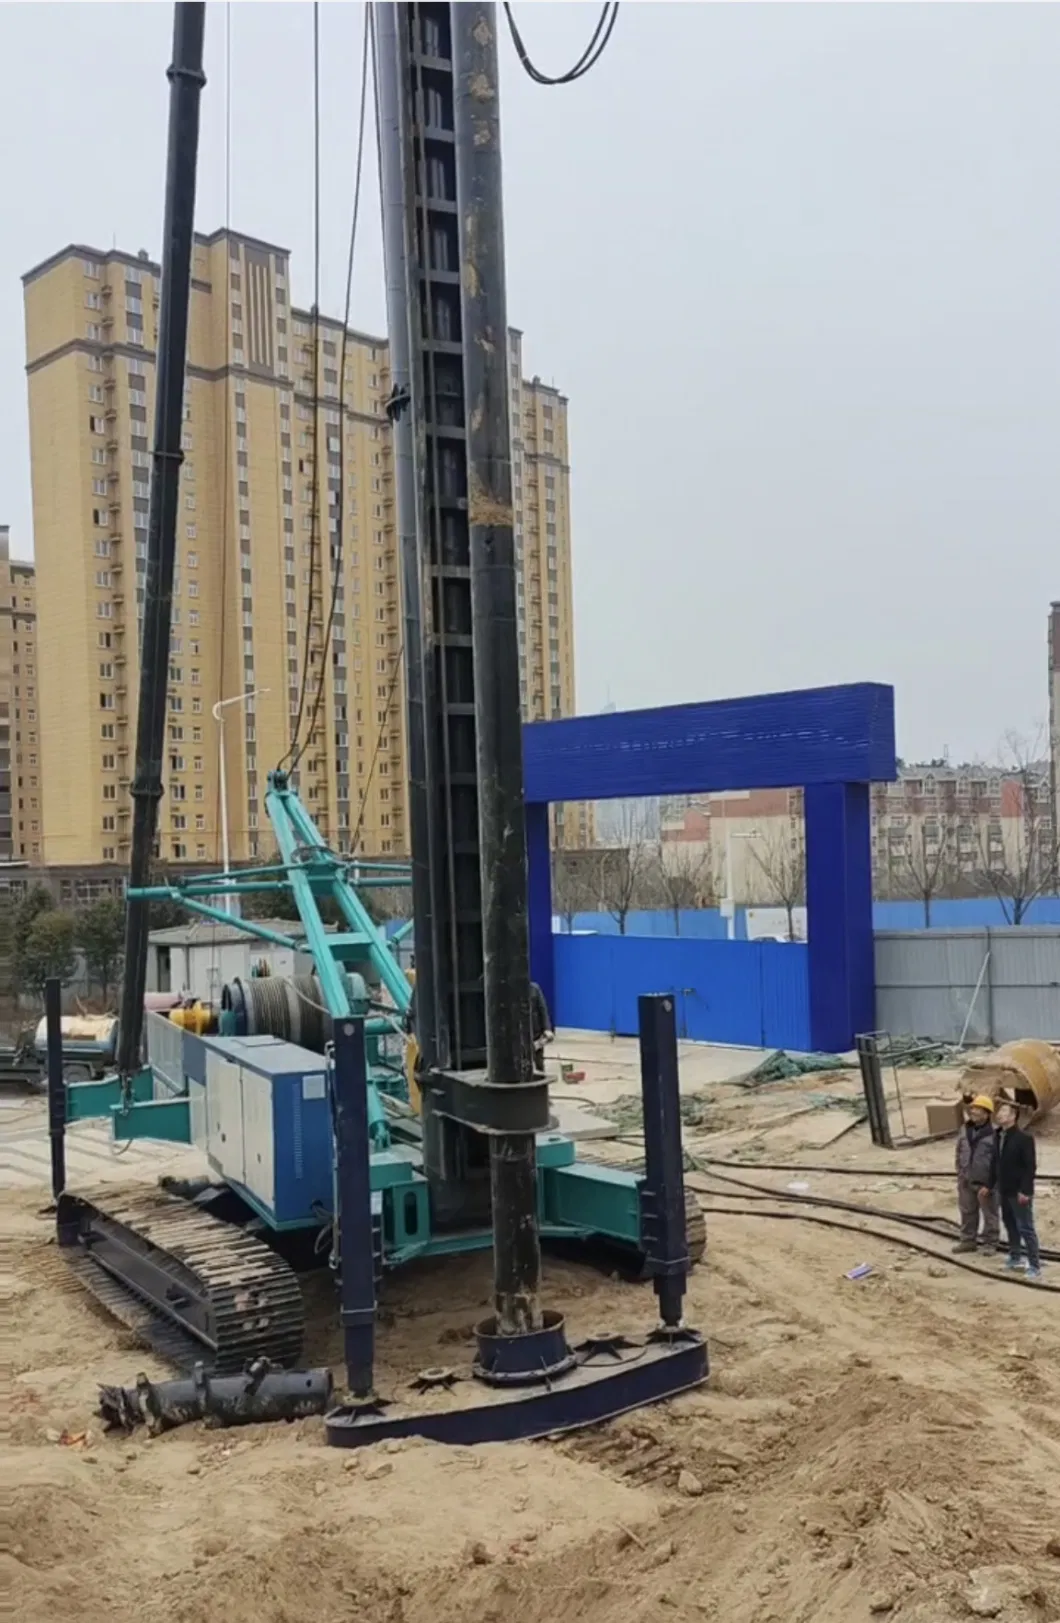 Henan 1 Year Hf in 20FT Container Post Screw Pile Driver